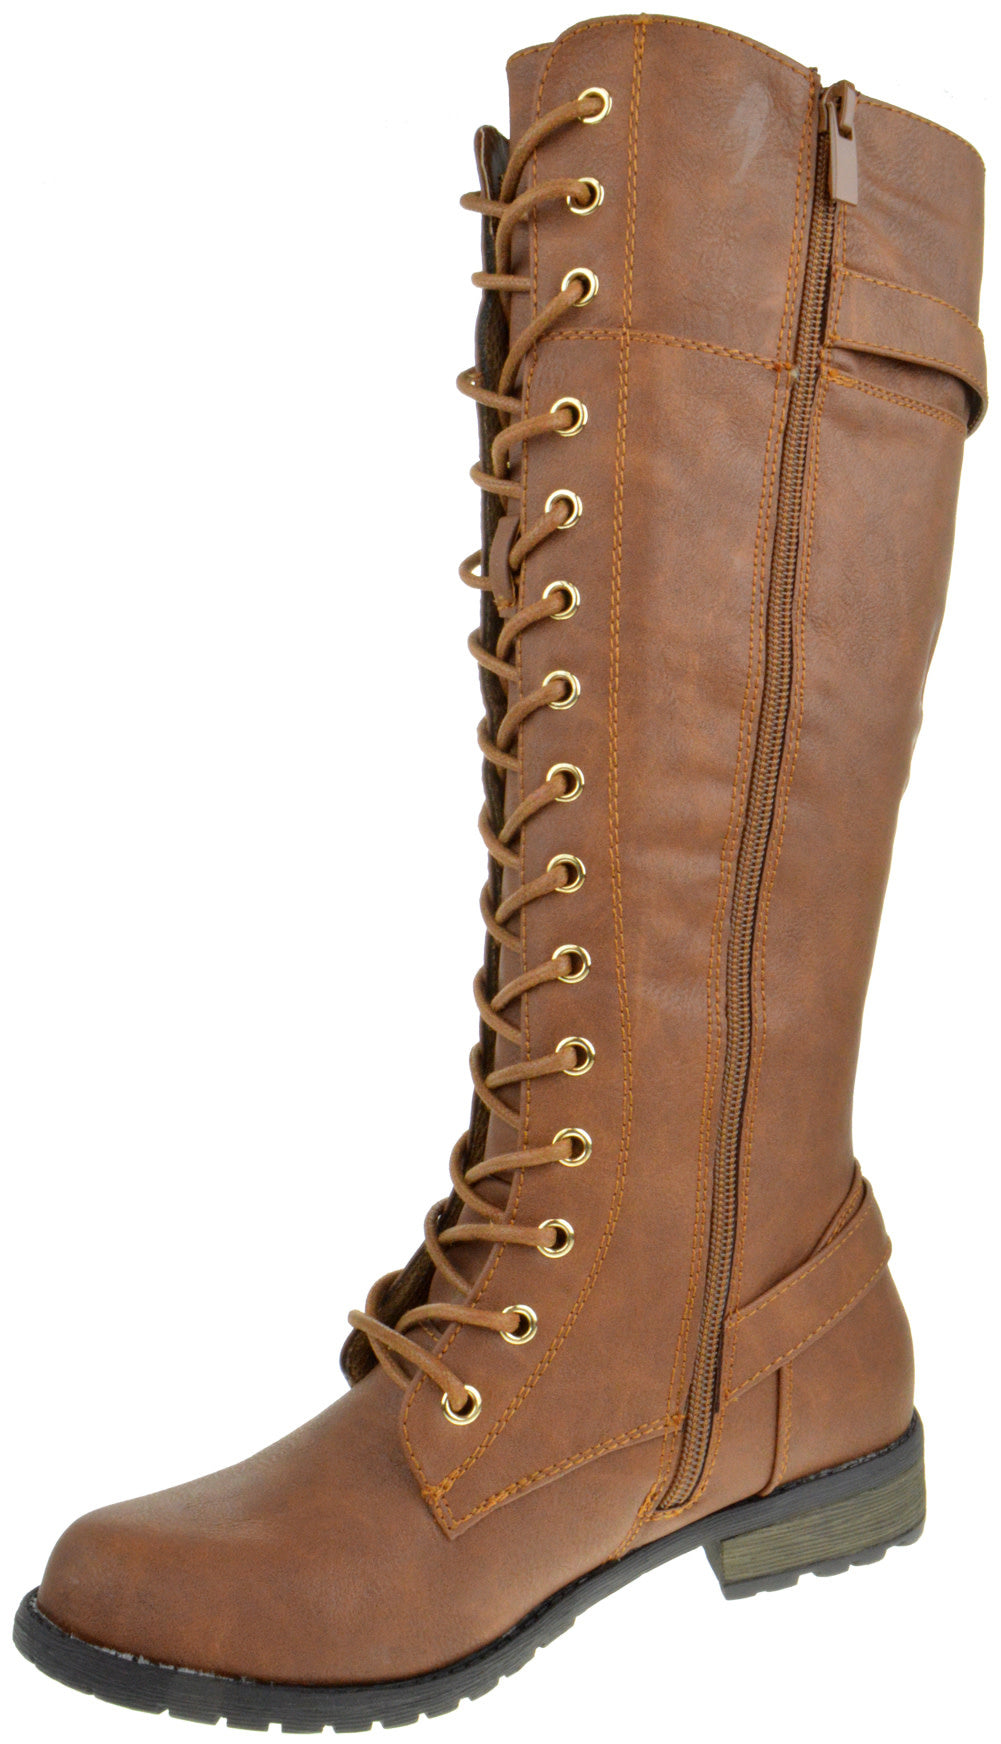 The sturdy brown combat boots | Street Style Store | SSS